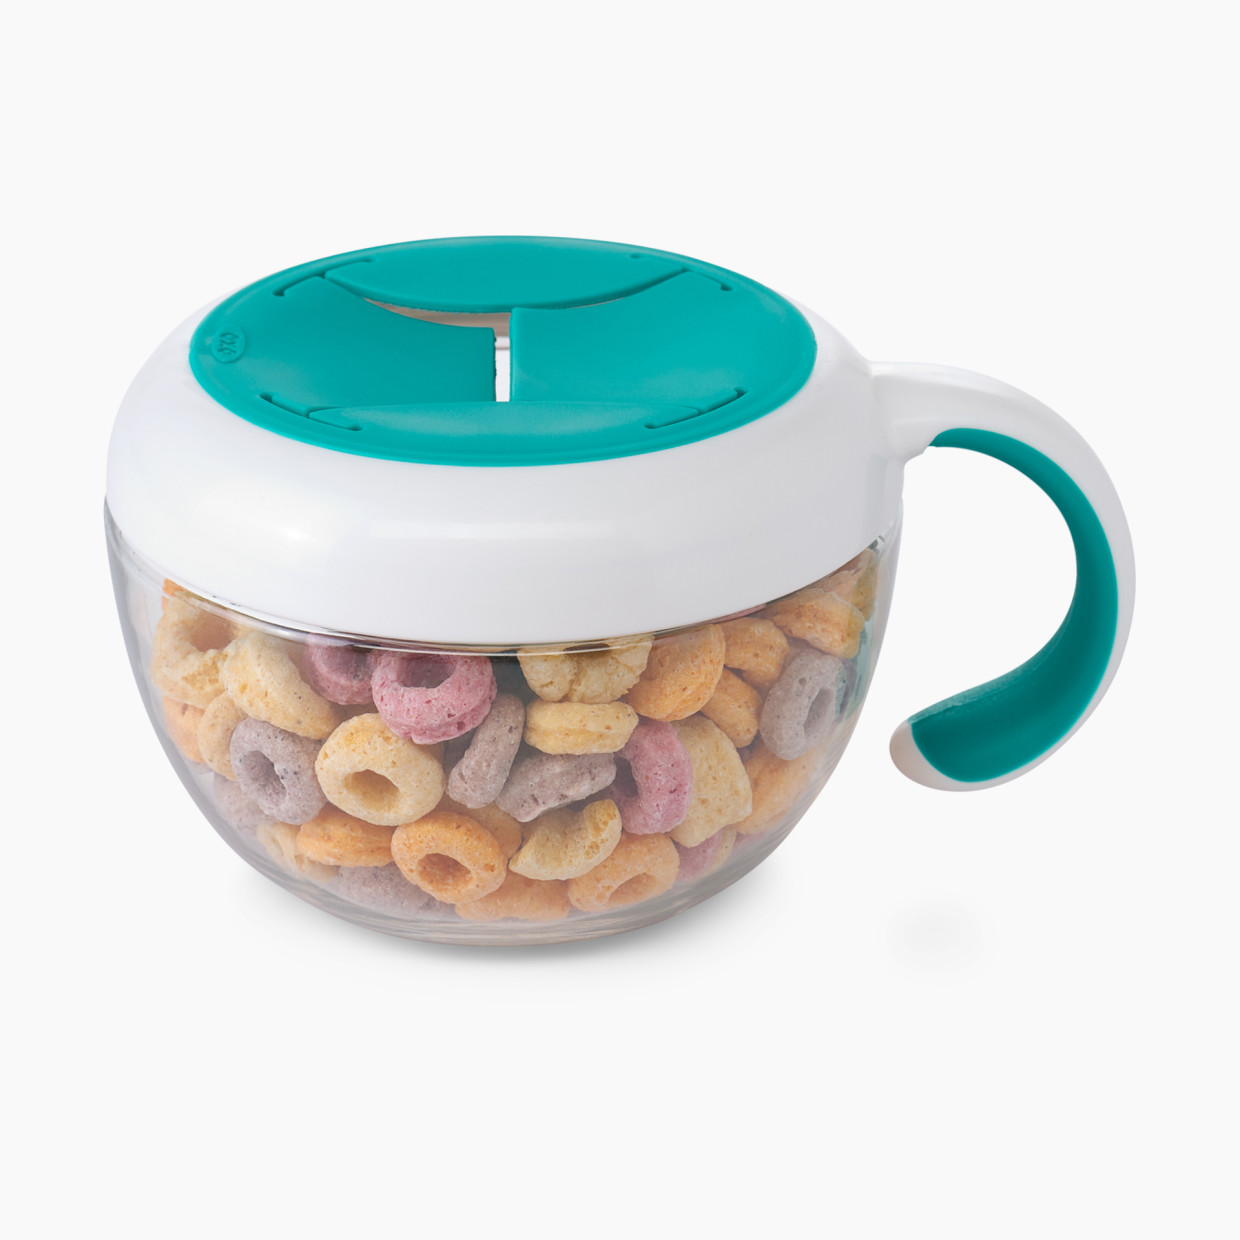 OXO Tot Flippy Snack Cup with Travel Lid - Teal.